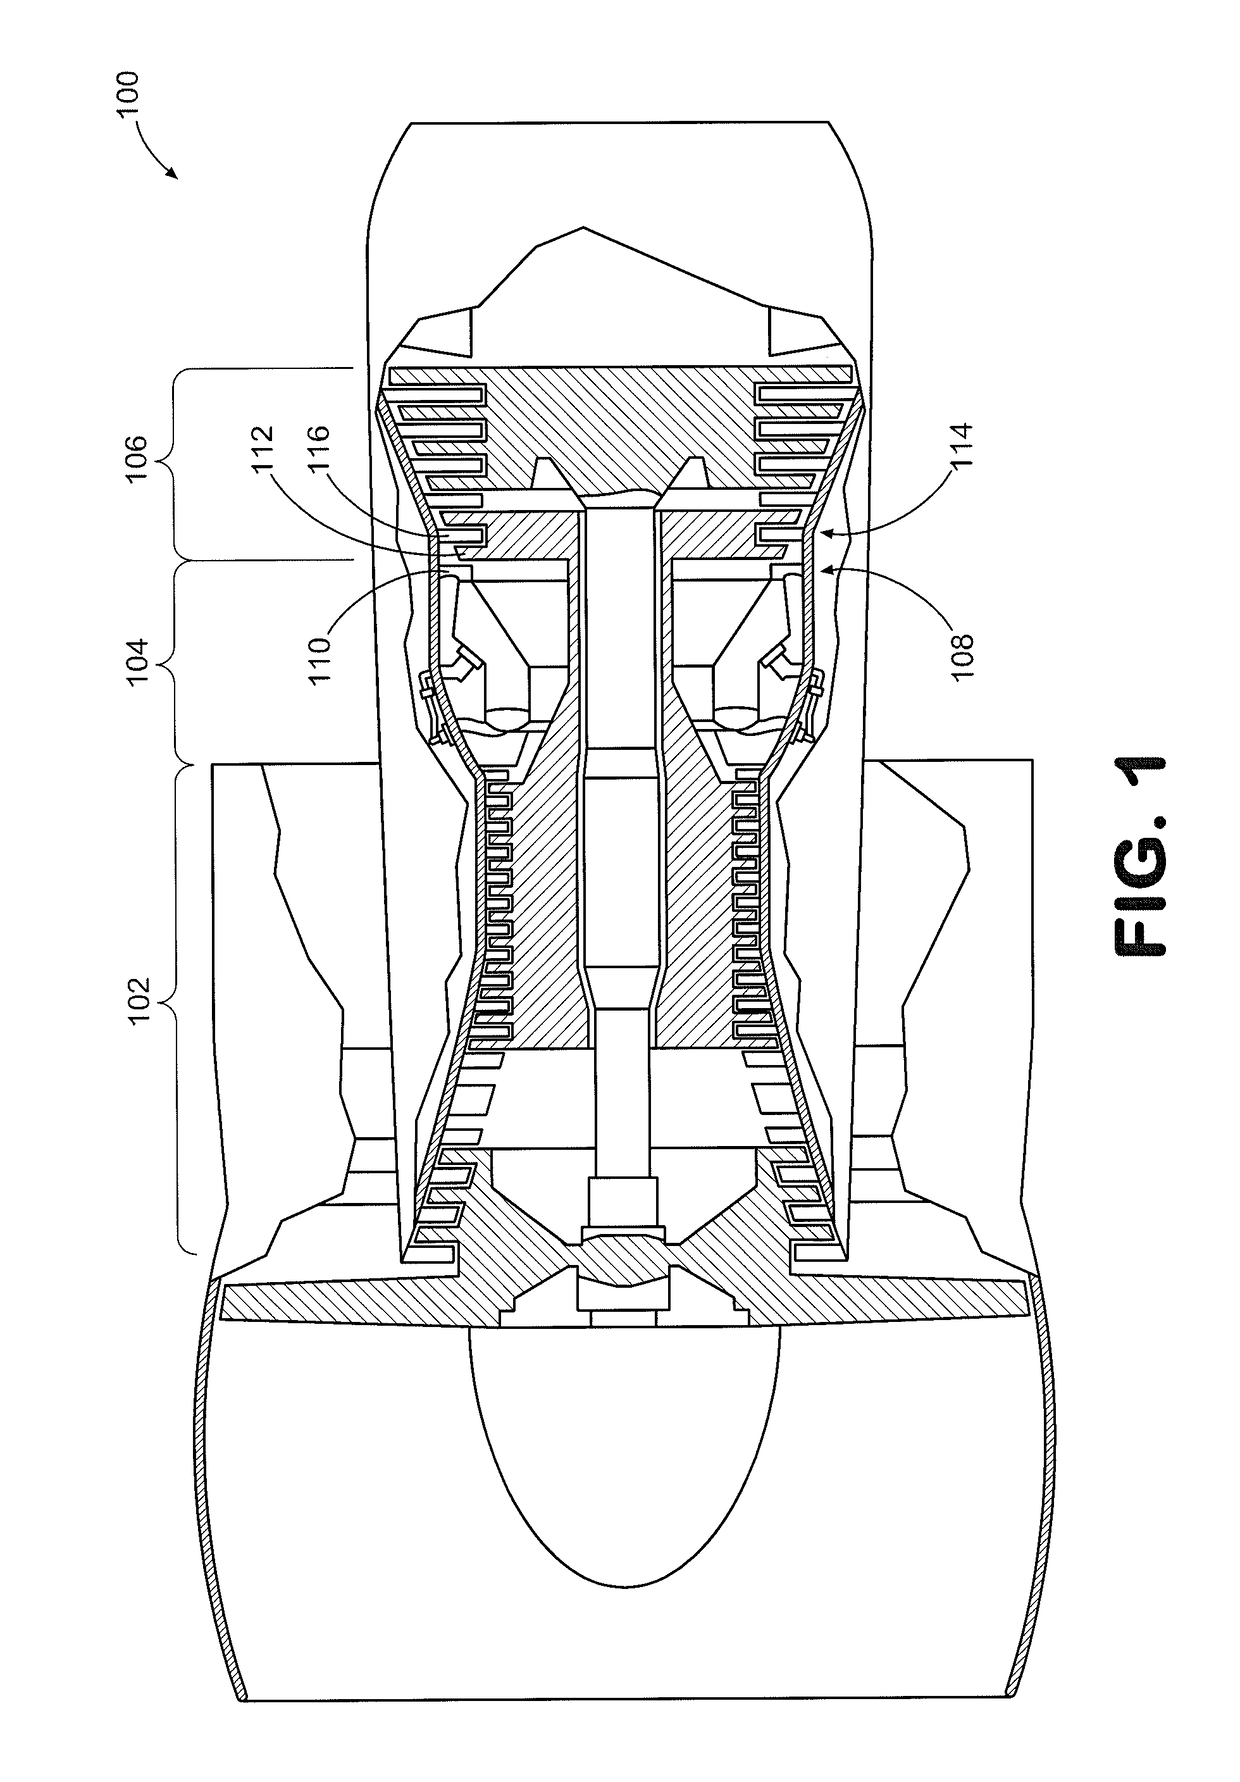 Gas turbine engine systems and related methods involving vane-blade count ratios greater than unity